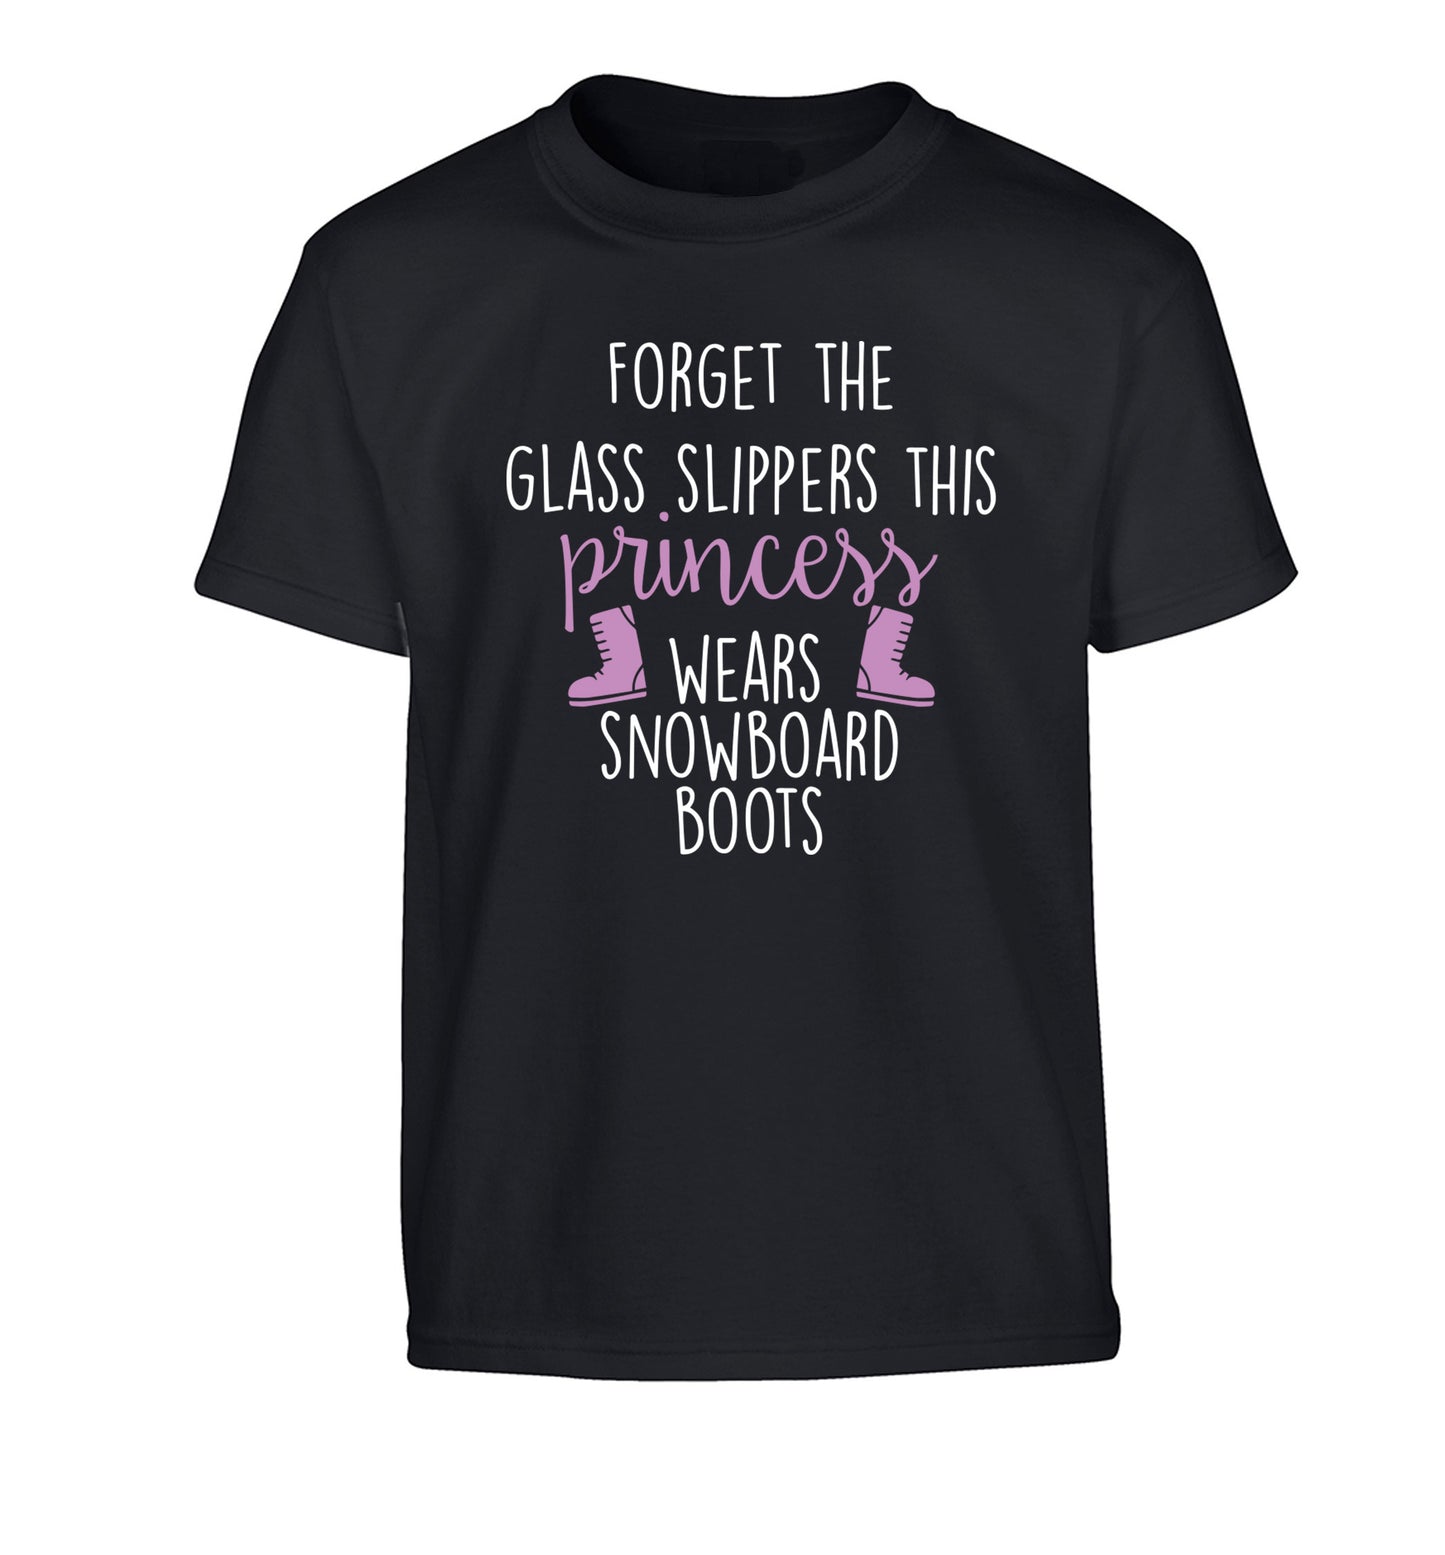 Forget the glass slippers this princess wears snowboard boots Children's black Tshirt 12-14 Years